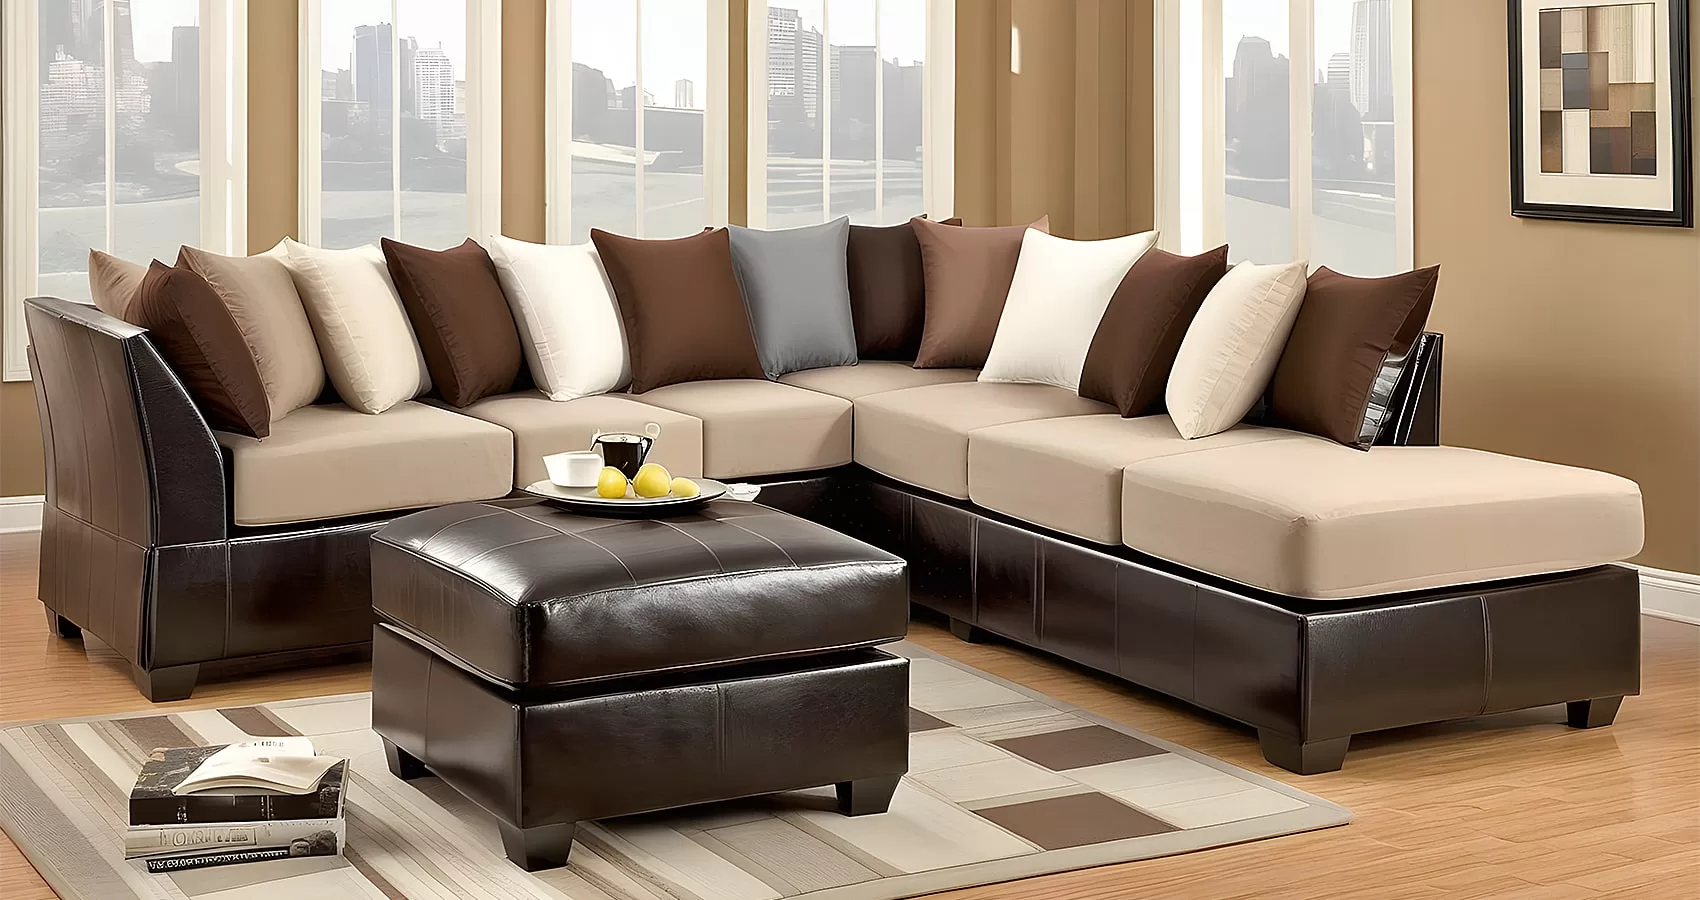 cushion covers for leather sectional sofa-min